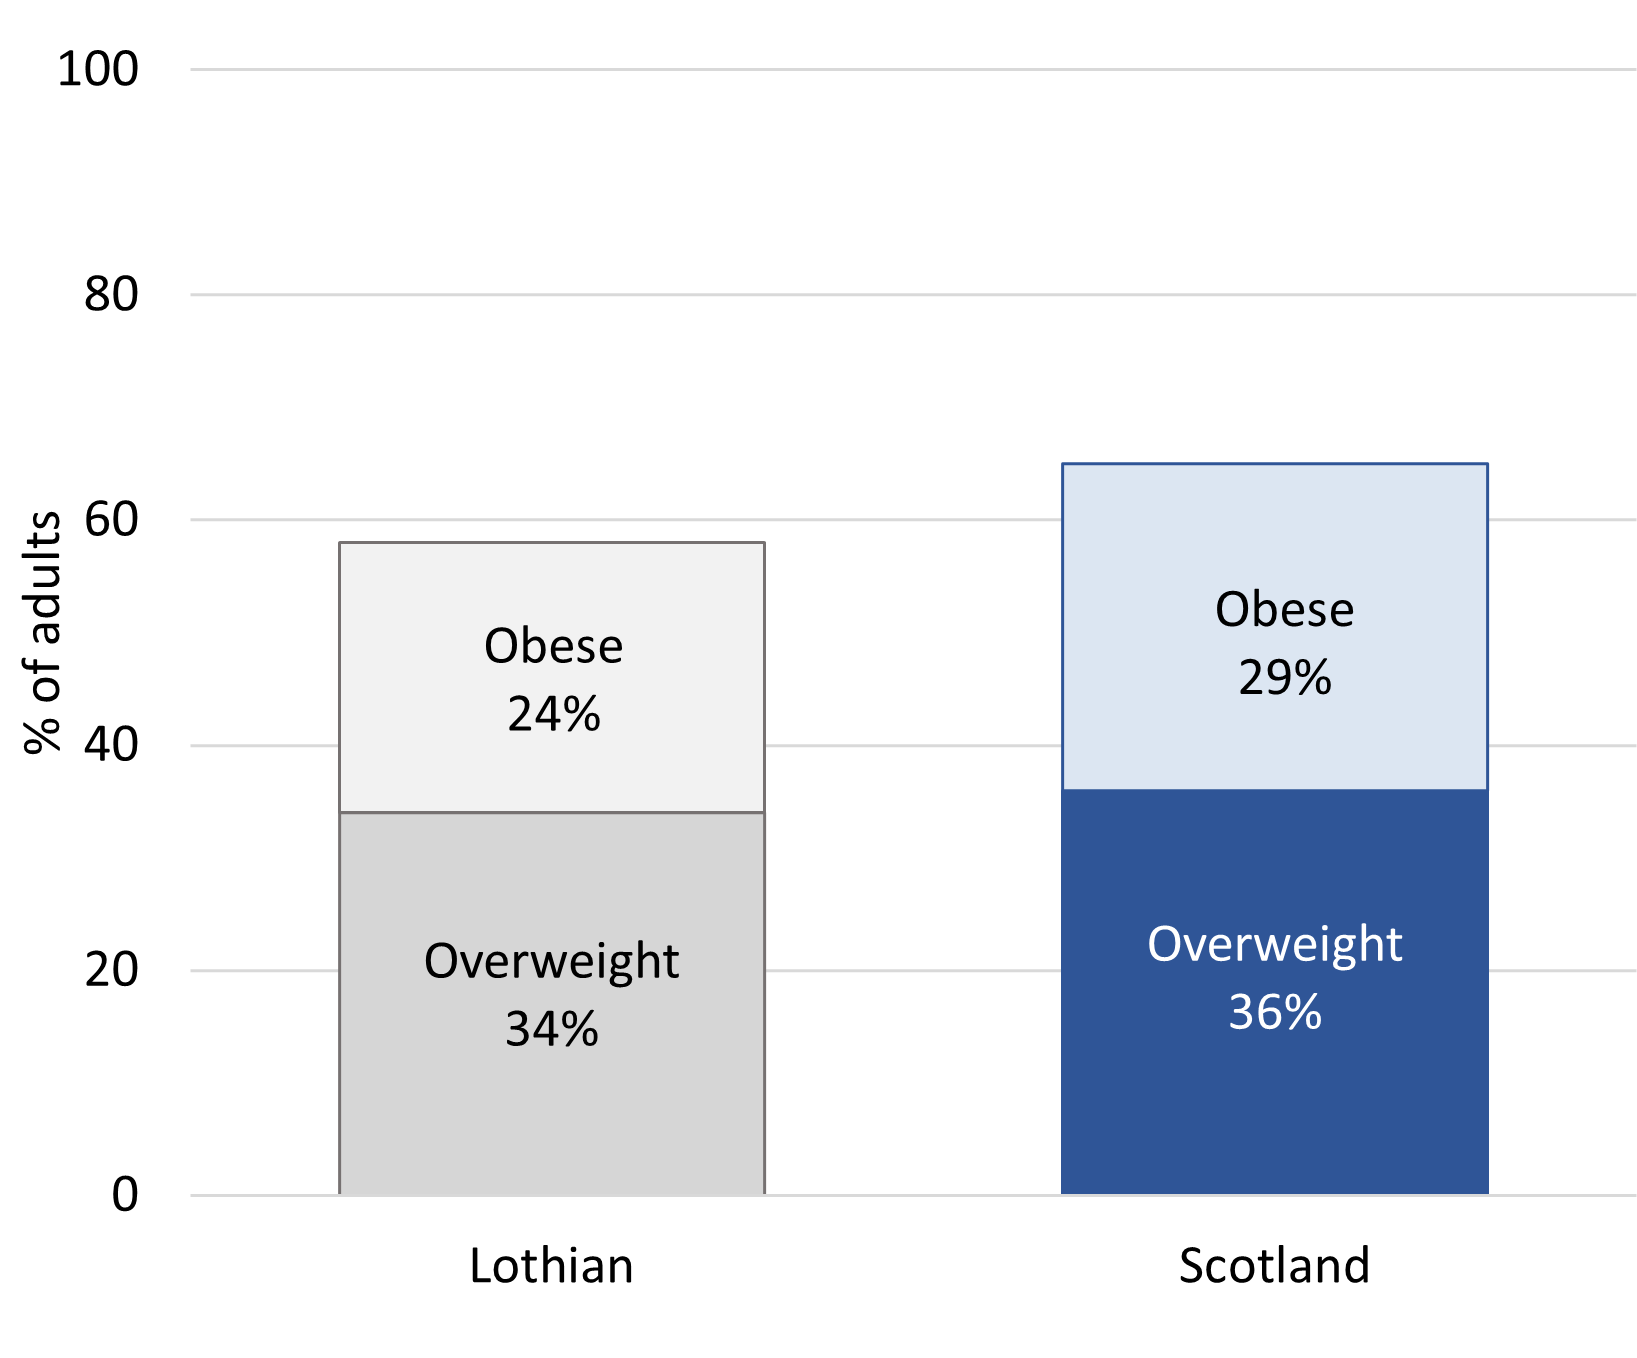 In both Lothian and Scotland the prevalence of overweight adults is higher than the prevalence of obese adults. Lothian has a lower prevalence of obese adults than Scotland, with 24% compared with 29%, and a slightly lower prevalence of overweight adults with 34% in Lothian compared with 36% in Scotland